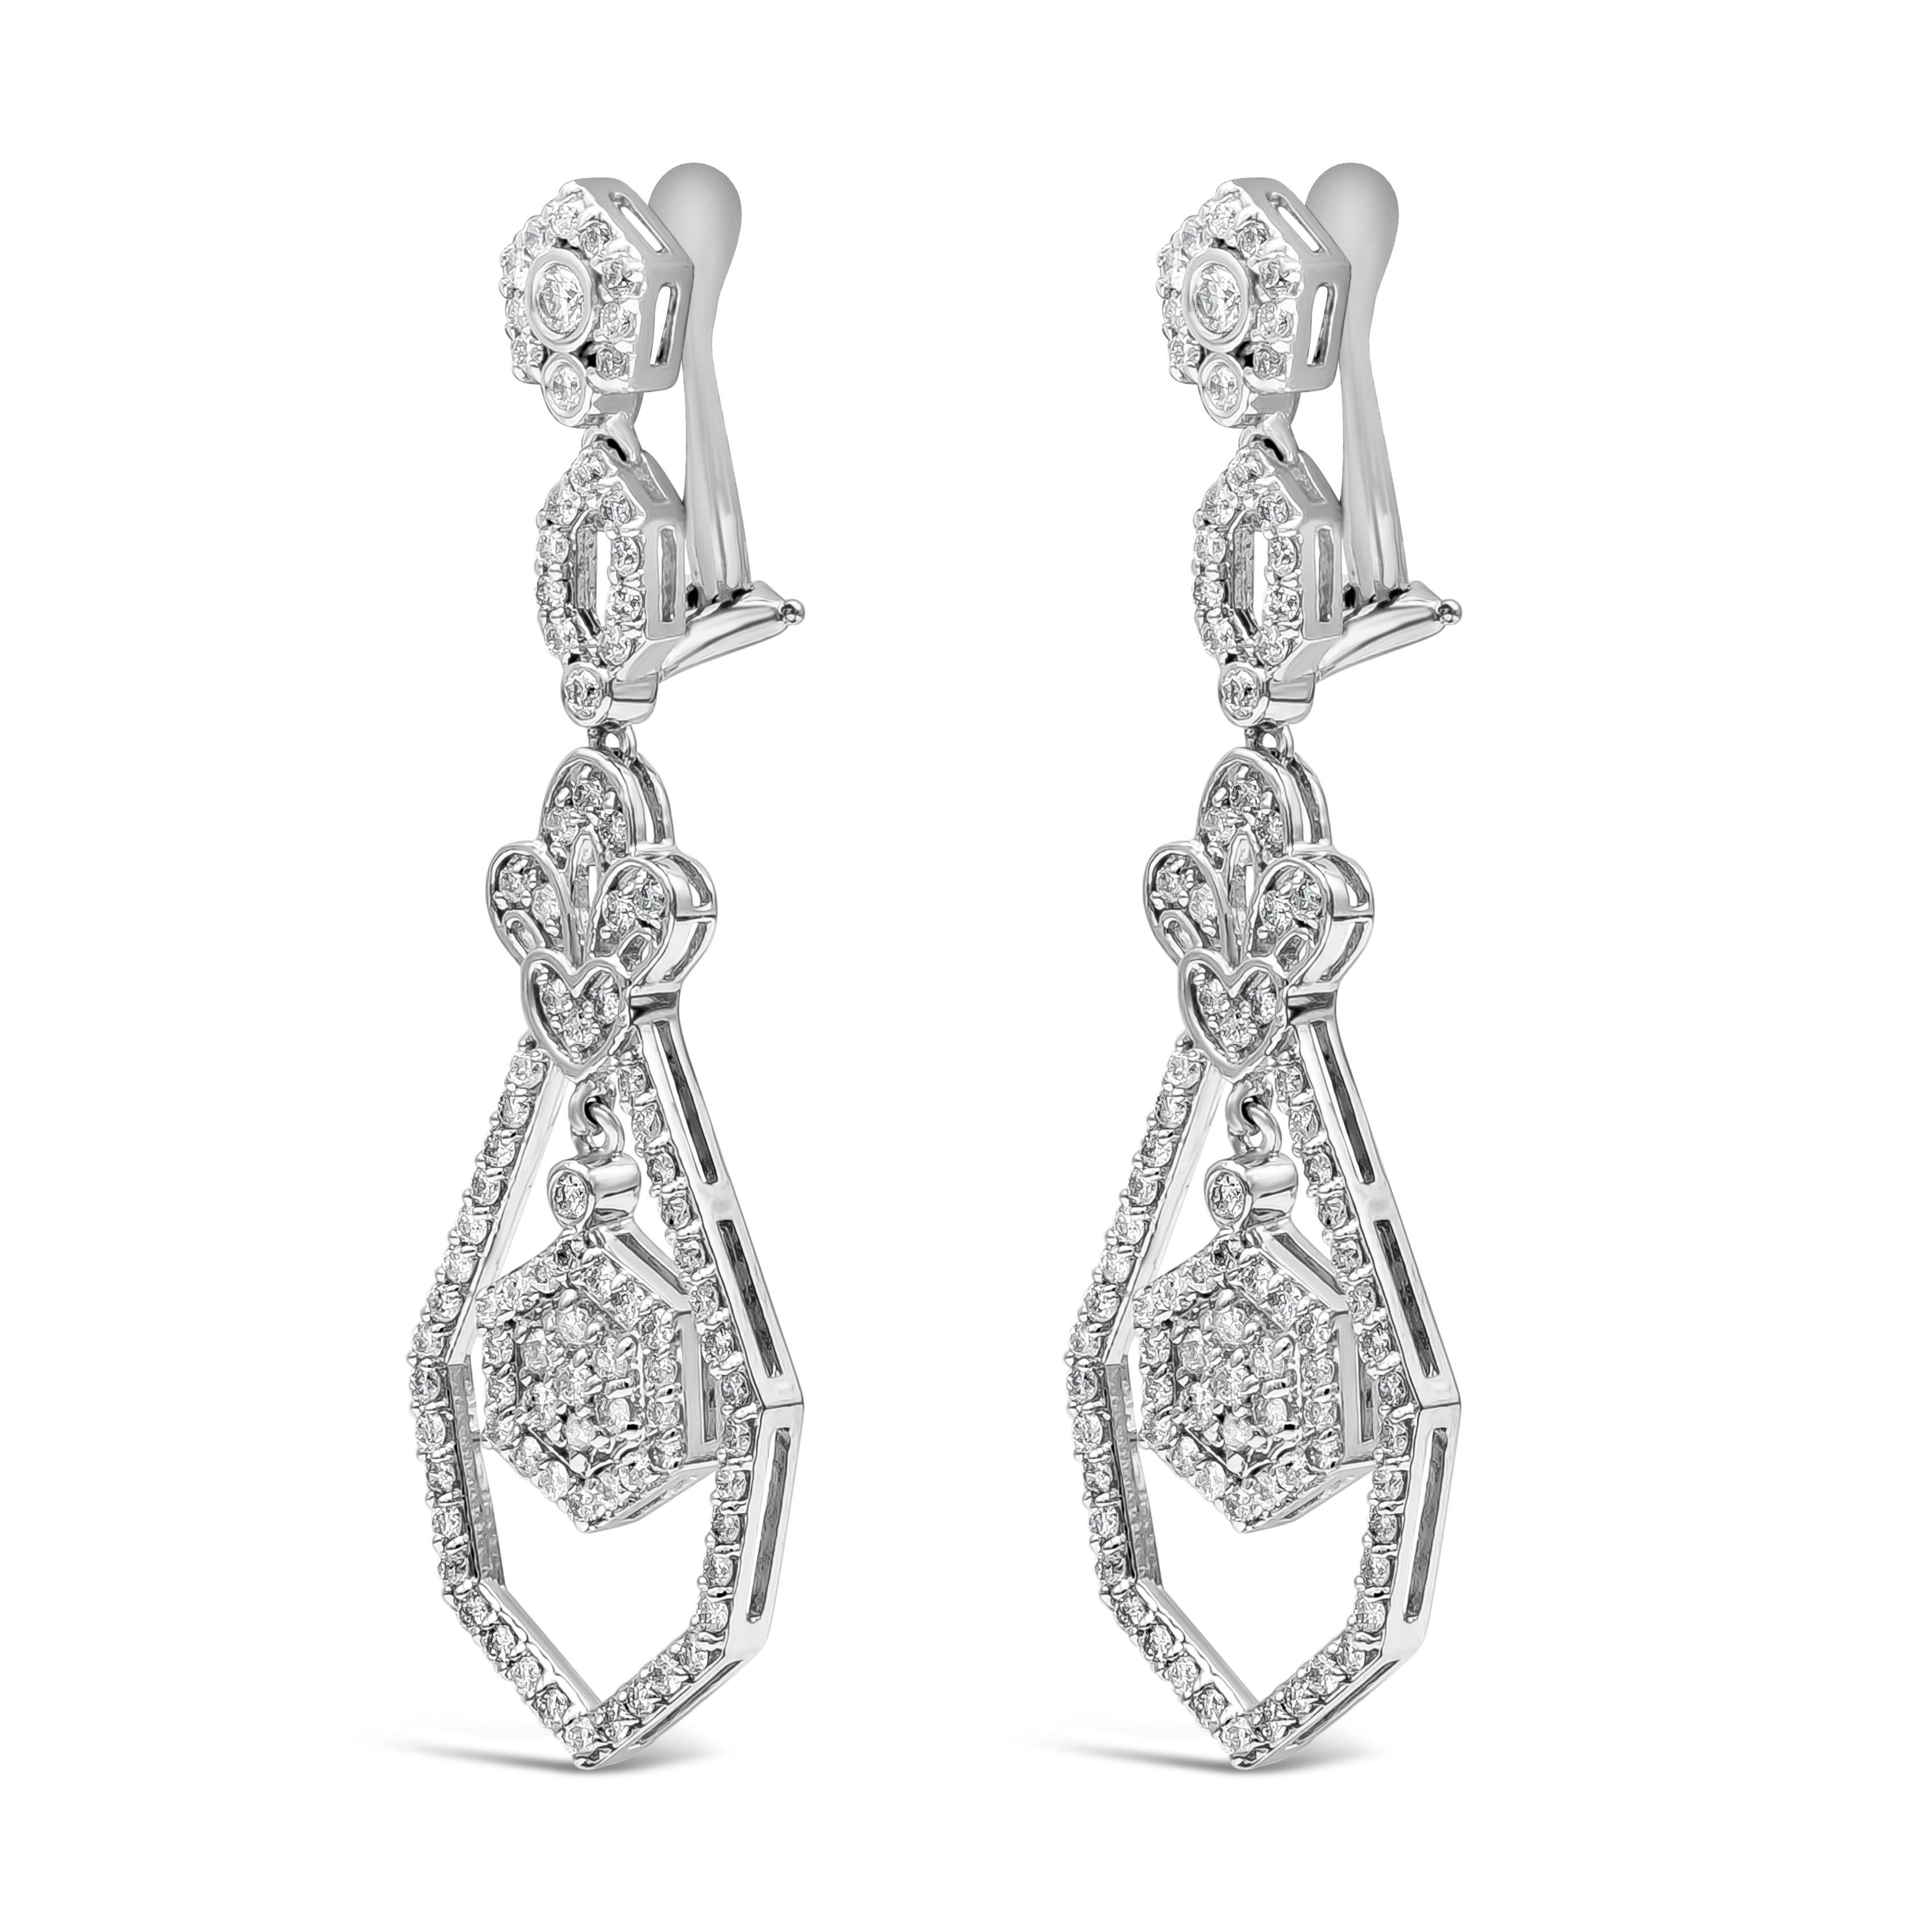 Exquisite chandelier dangle earrings, showcasing 184 round diamonds weighing 1.50 carats total with H color and I1 clarity. Made with a drop open-work design for an antique look. Set on 14K white gold.

Style available in different price ranges.